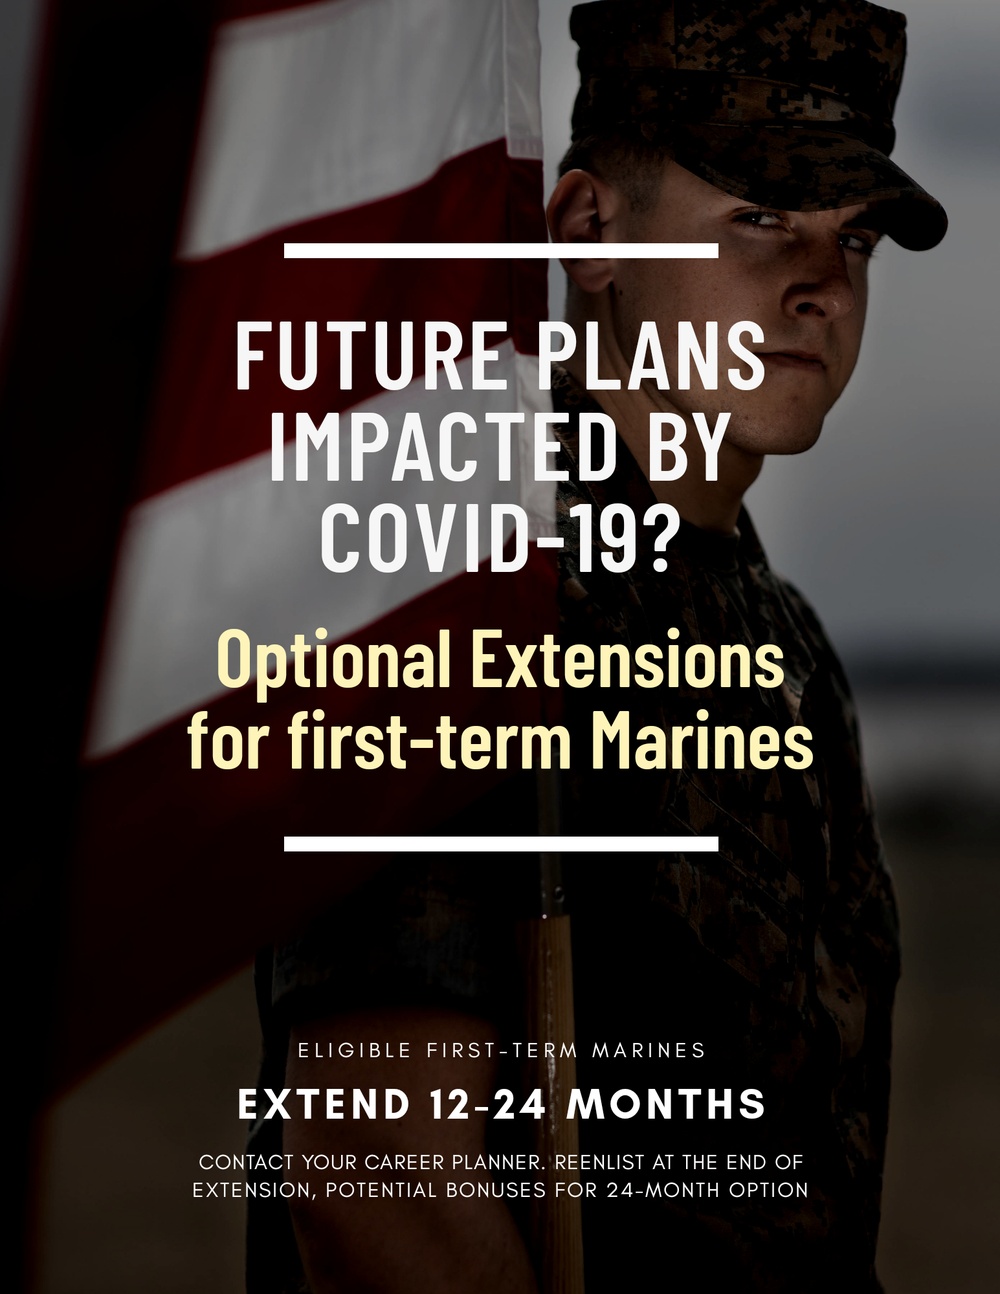 Optional Extensions for First-Term Marines